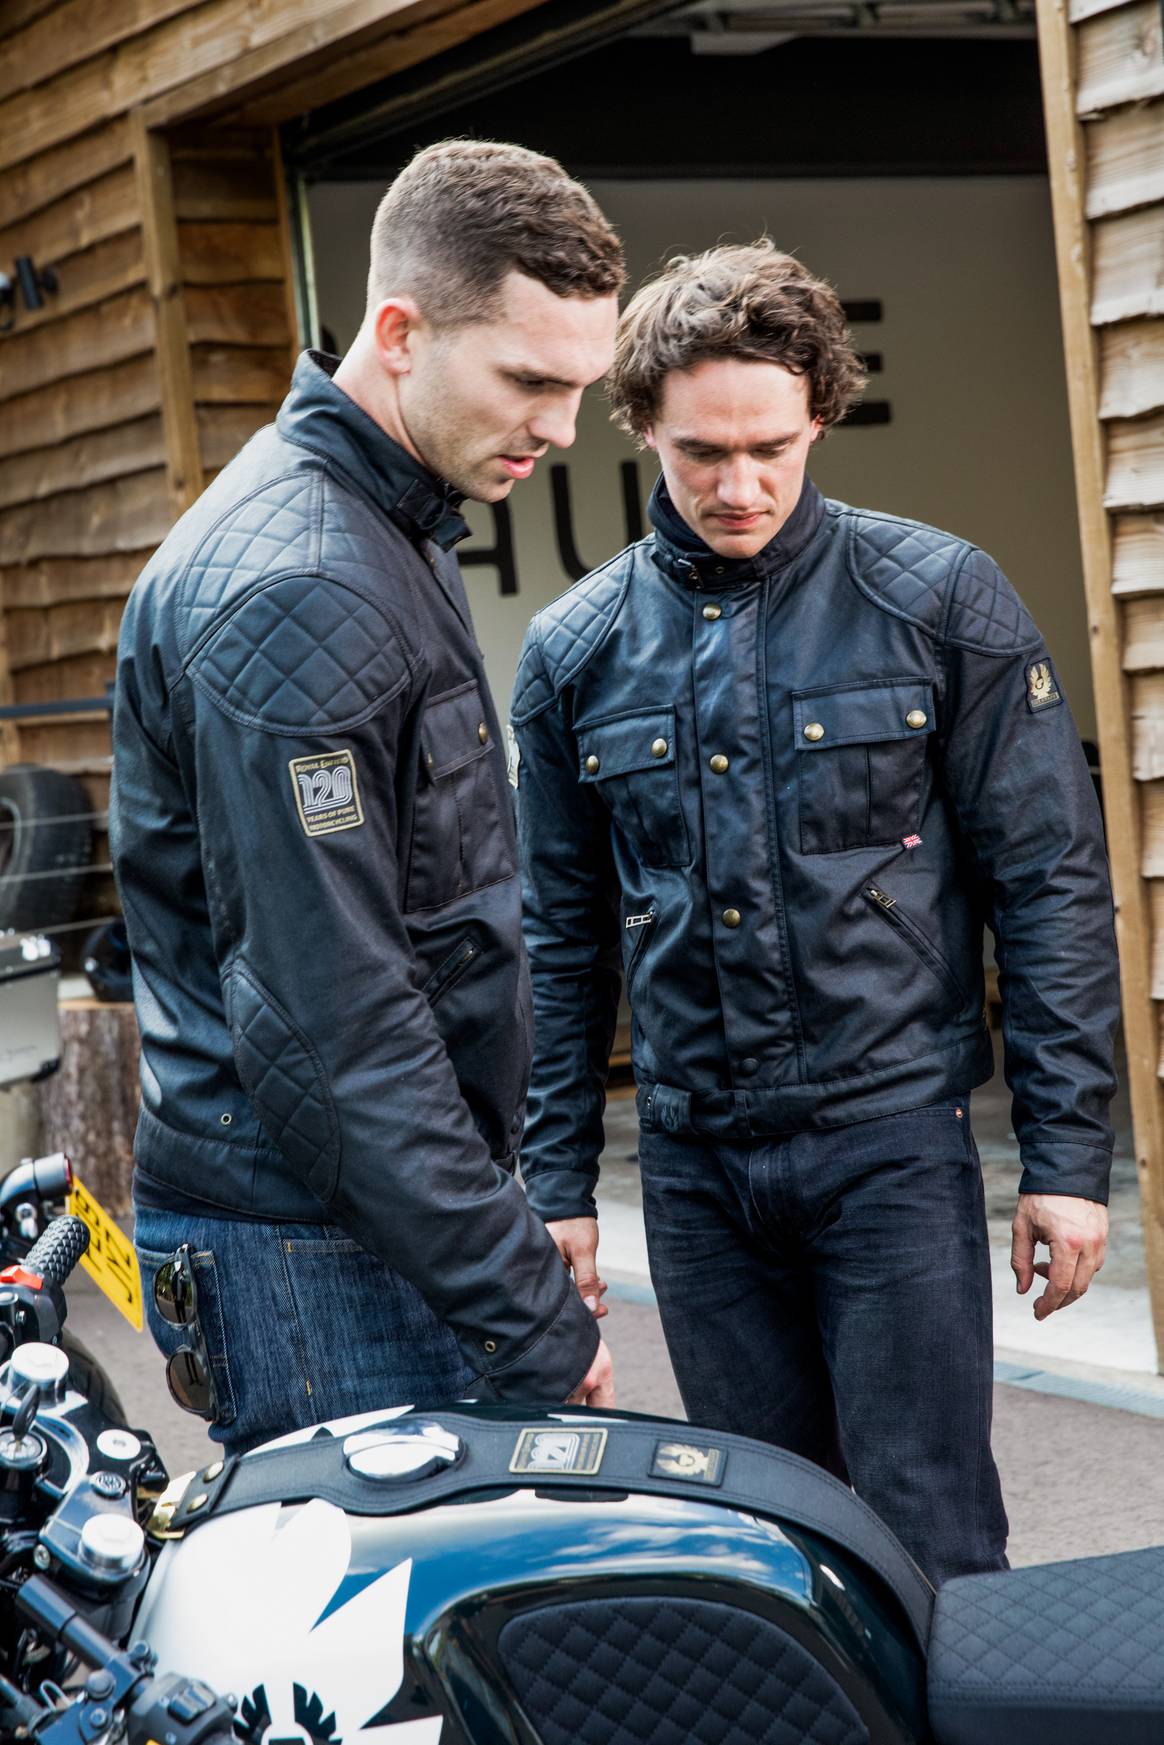 Image: courtesy of Royal Enfield x Belstaff